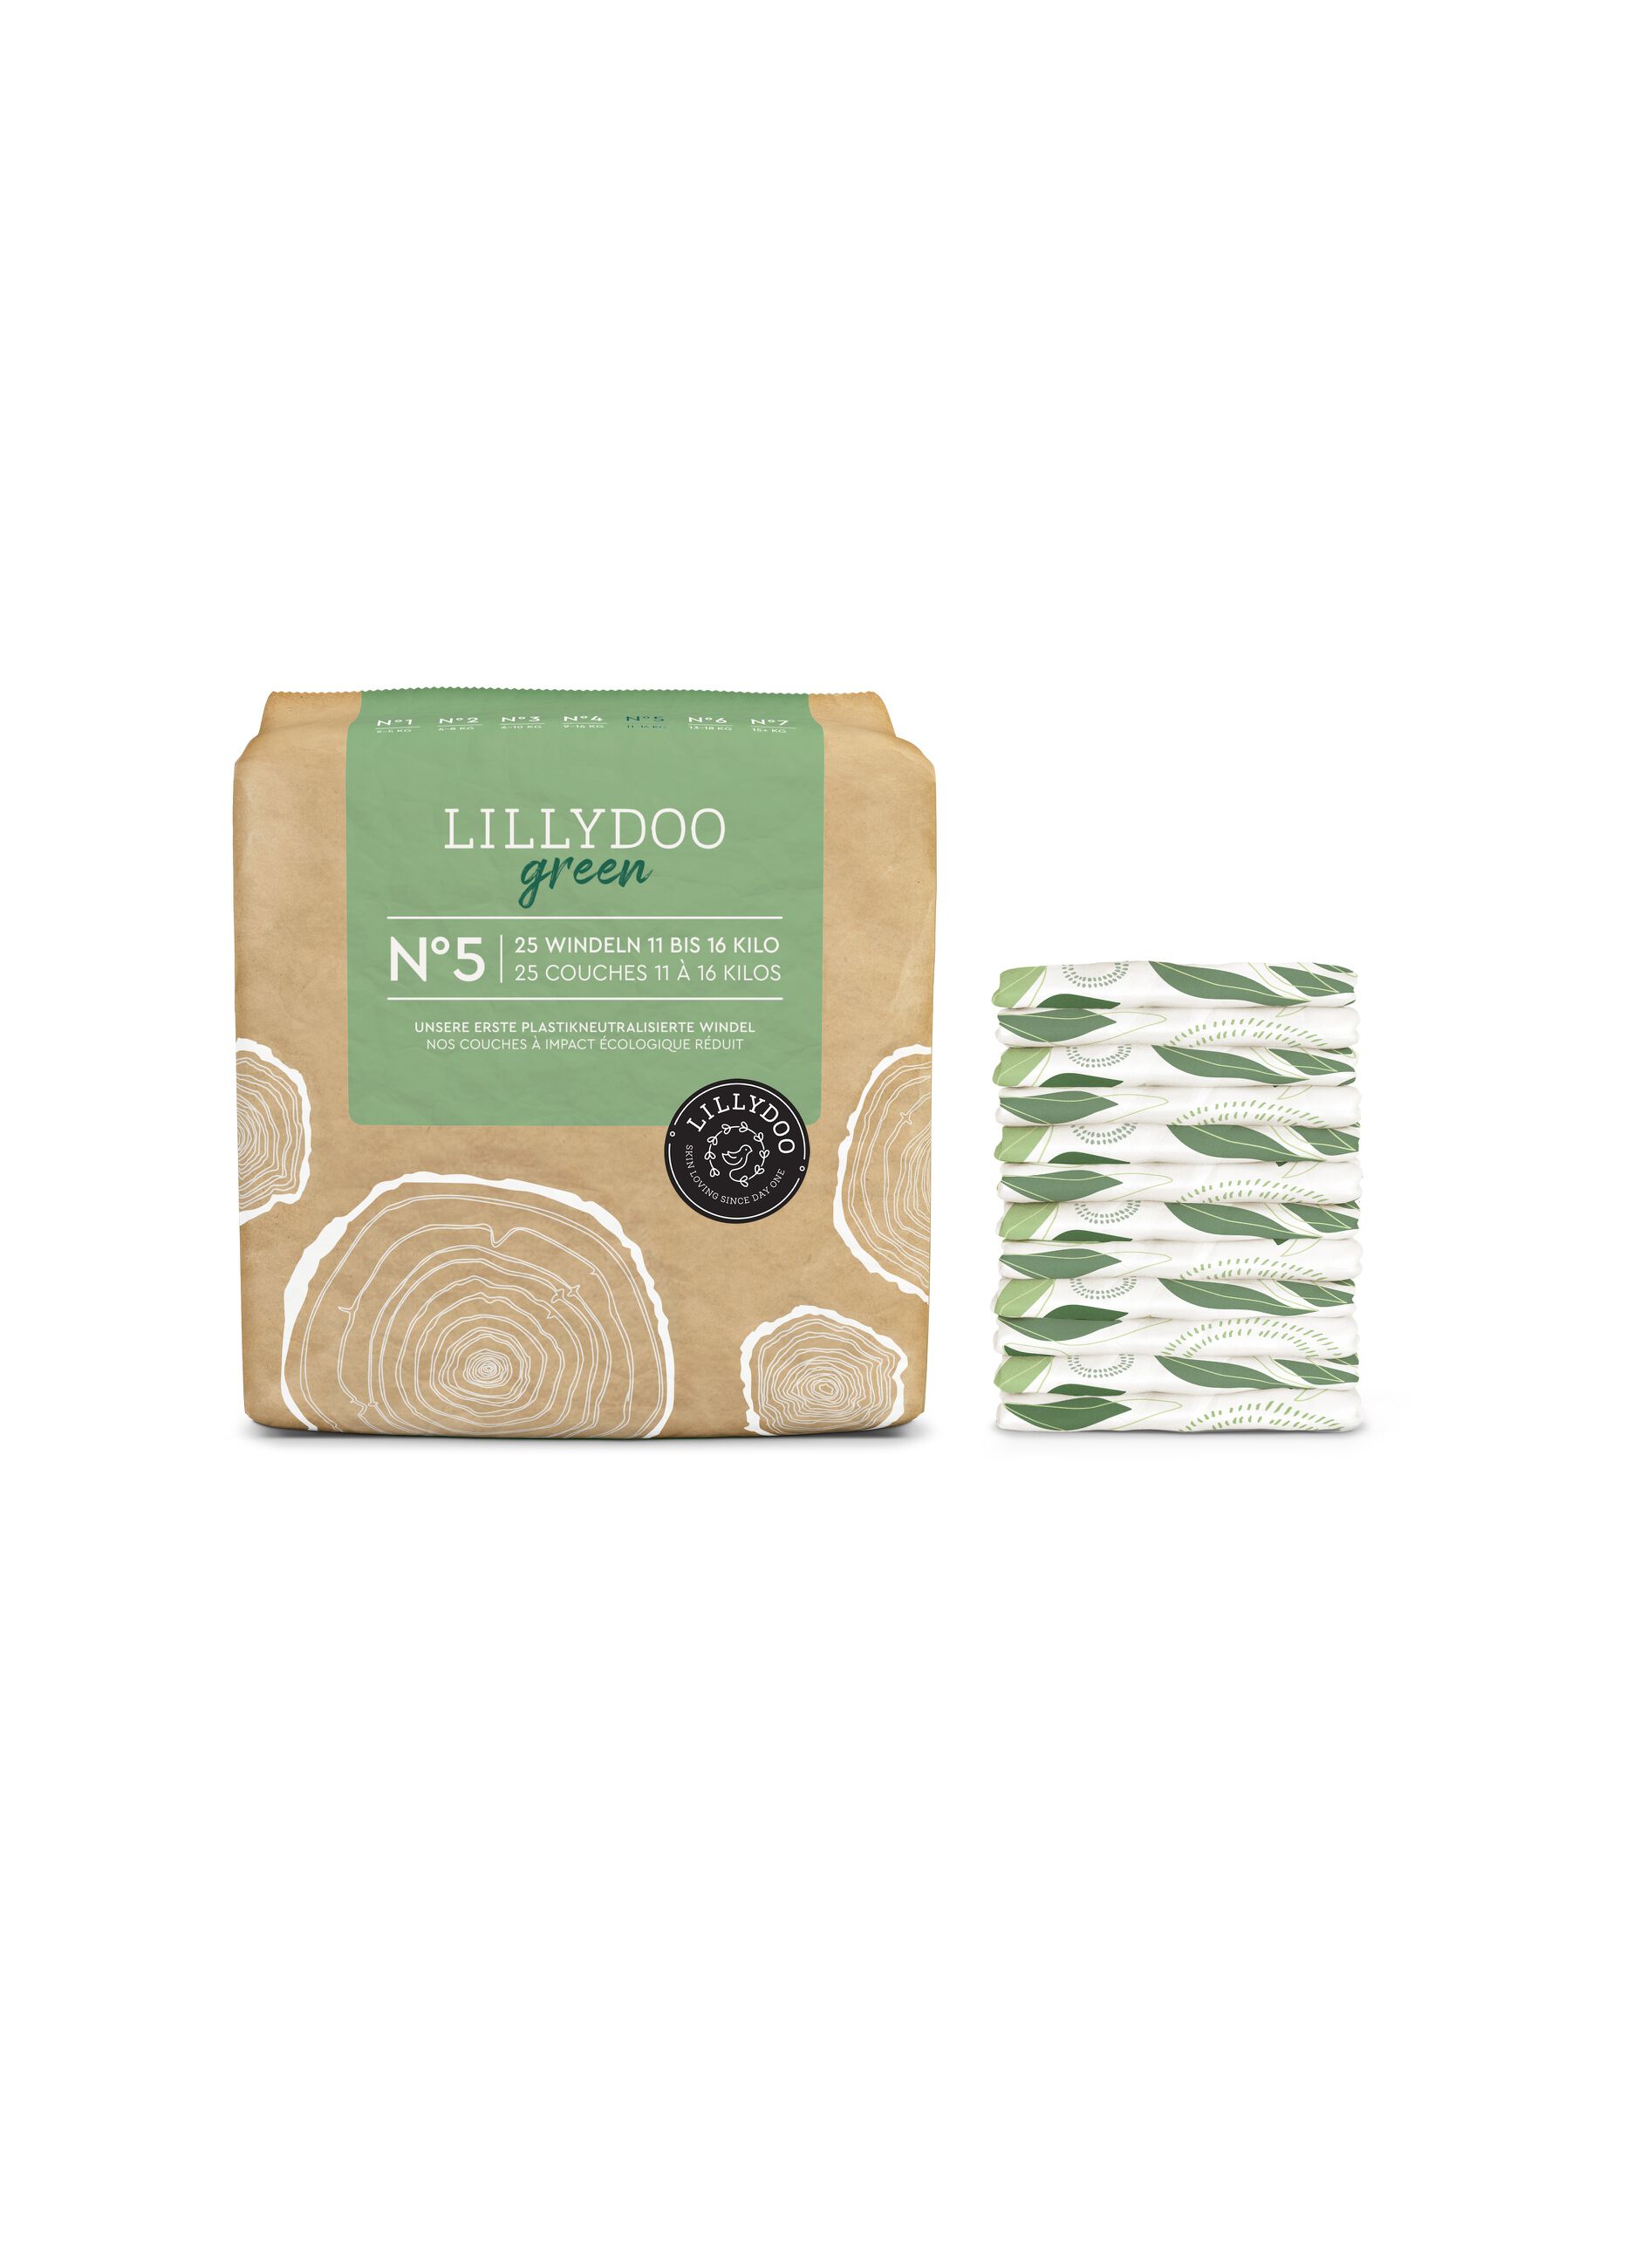 Pañales ecosostenibles N° 5 (11-16 kg) Lillydoo